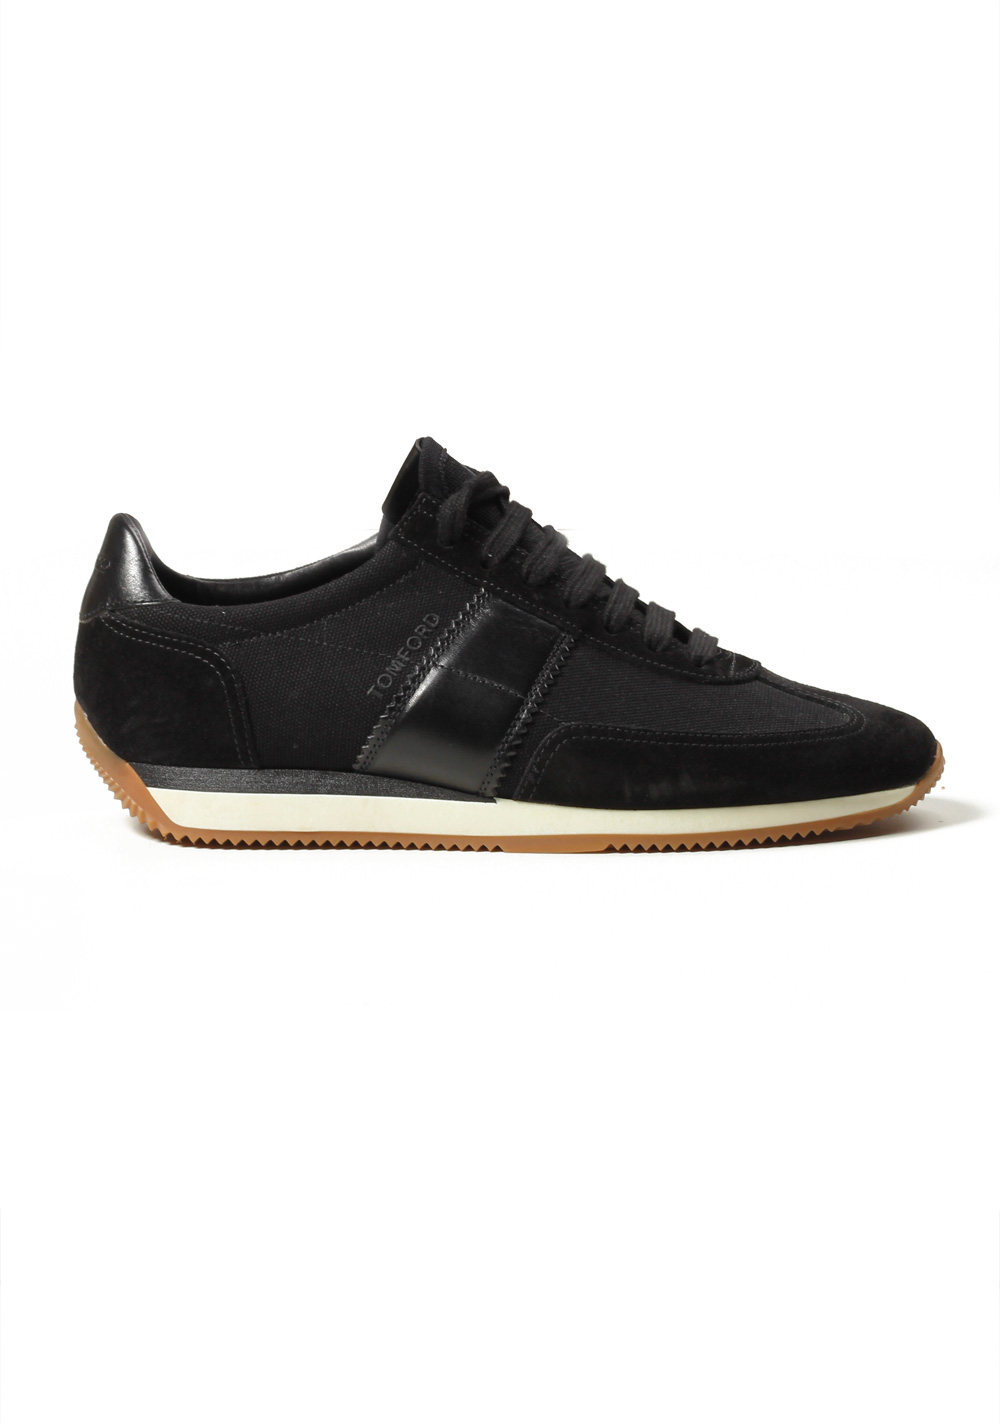 TOM FORD Orford Colorblock Black Trainer Sneaker Shoes Size 7 UK / 8 U.S. | Costume Limité